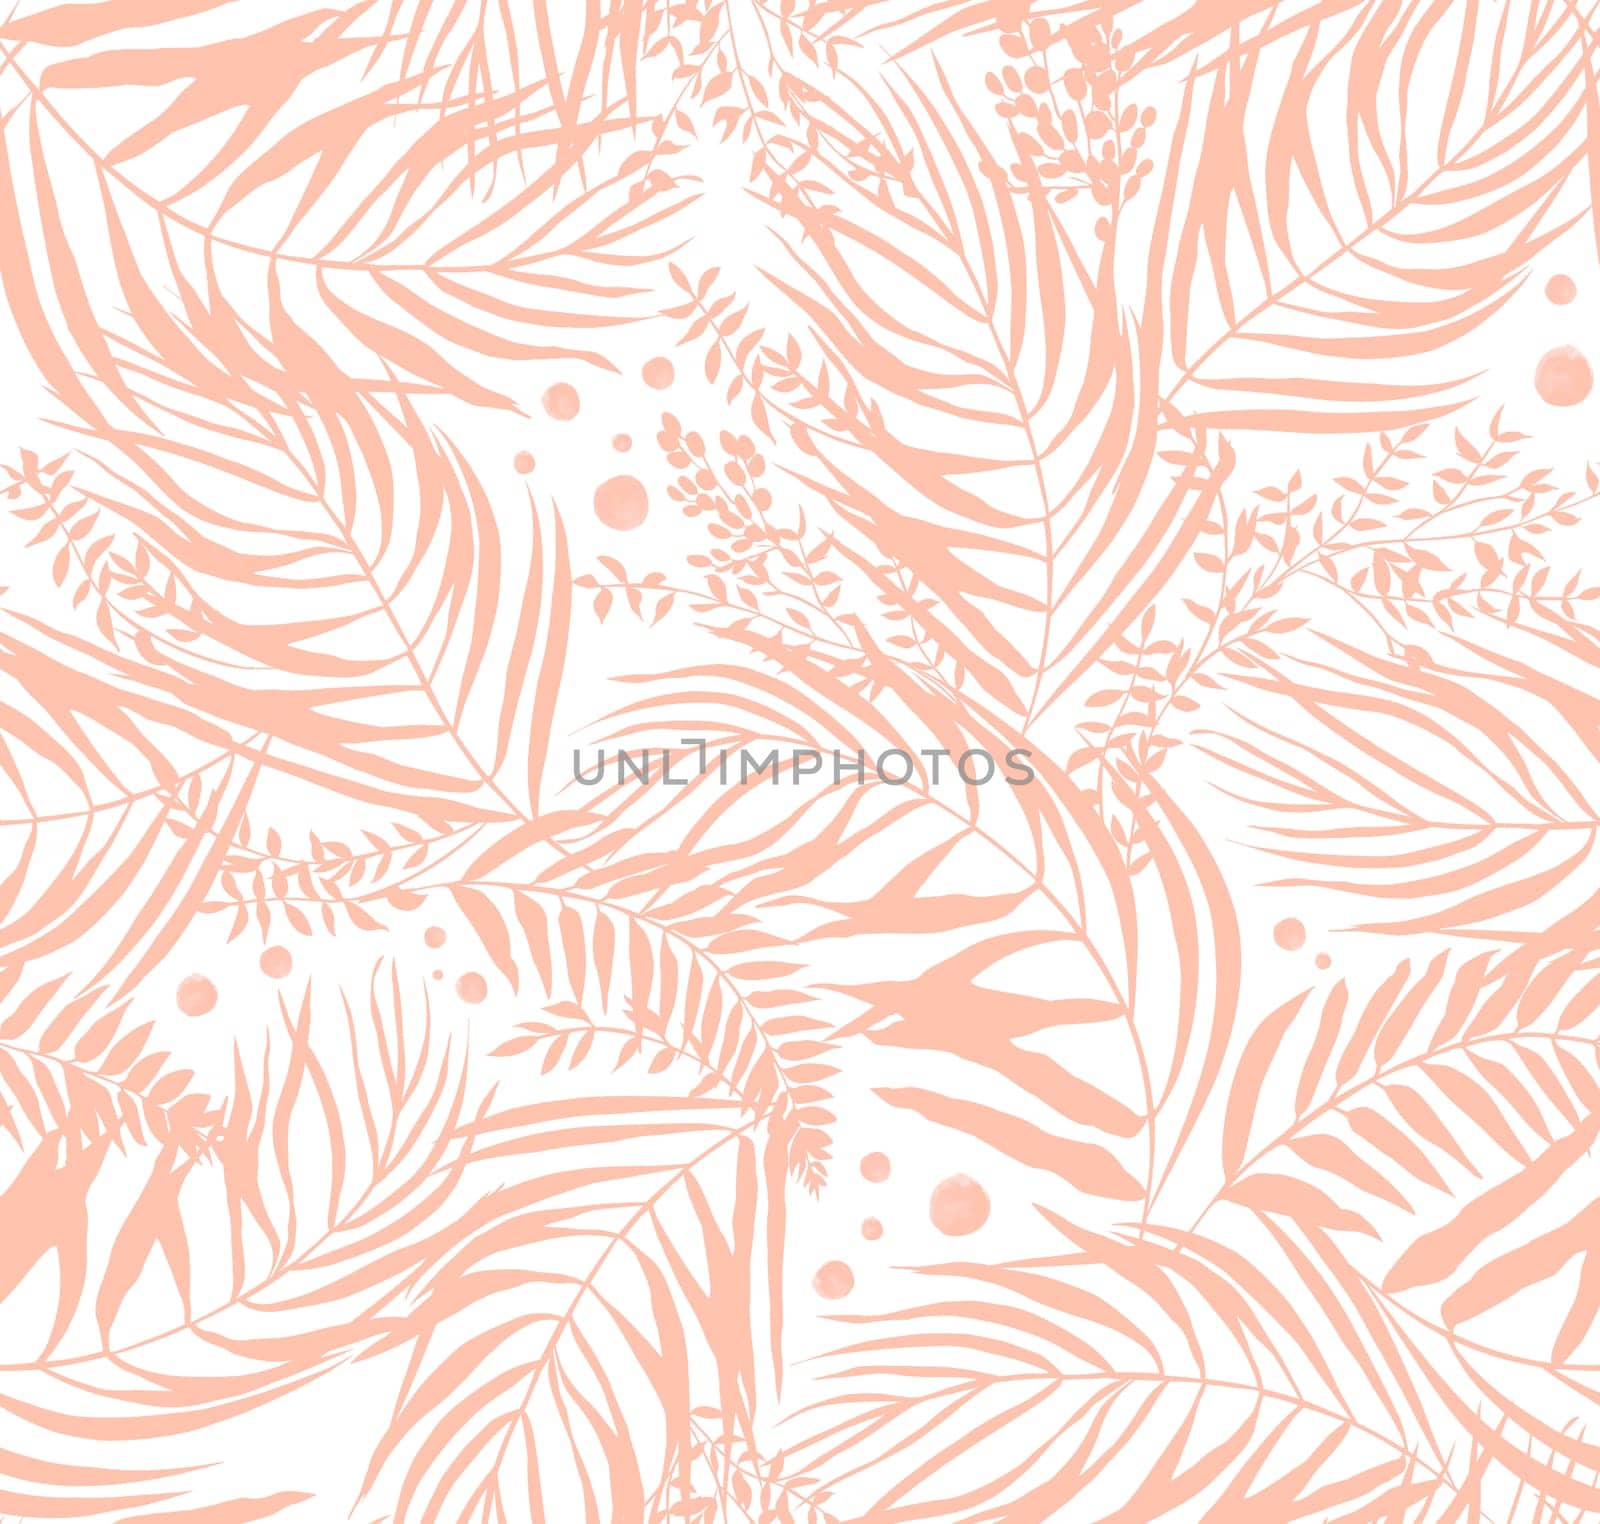 seamless pattern with silhouettes of tropical palm trees and dry herbs